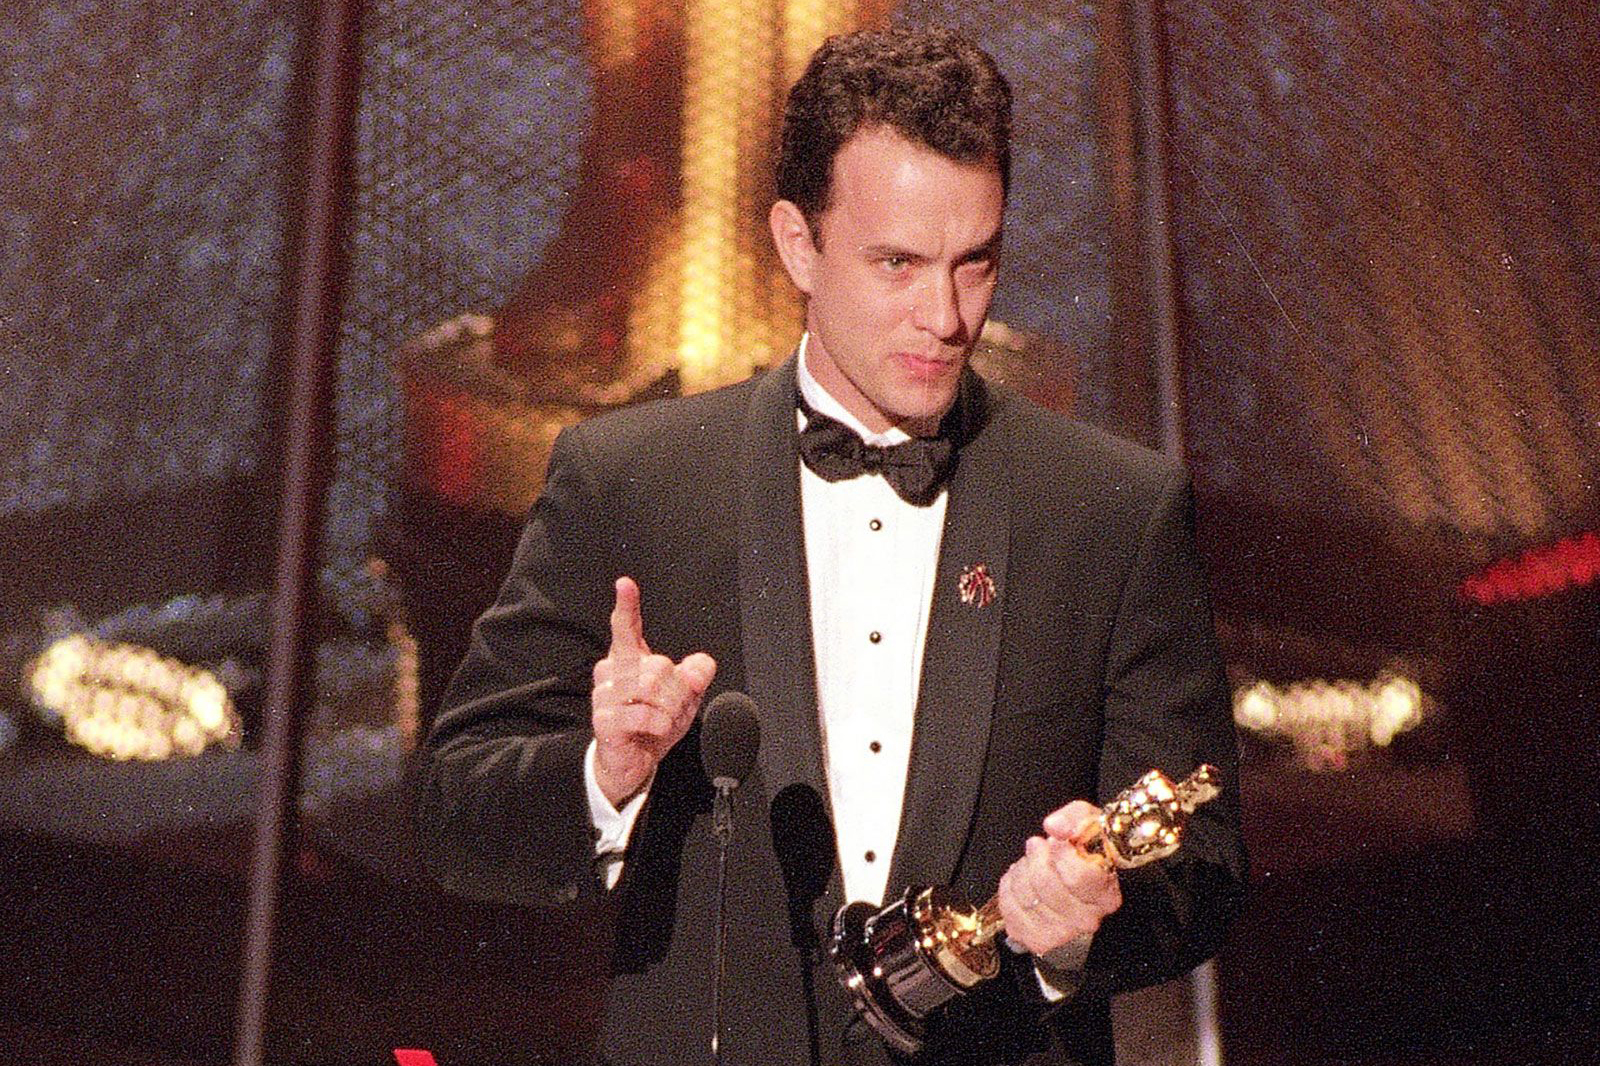 Tom Hanks gives an acceptance speech at the 66th Annual Academy Awards on March 21, 1994. Hanks won for his role in the movie "Philadelphia." 